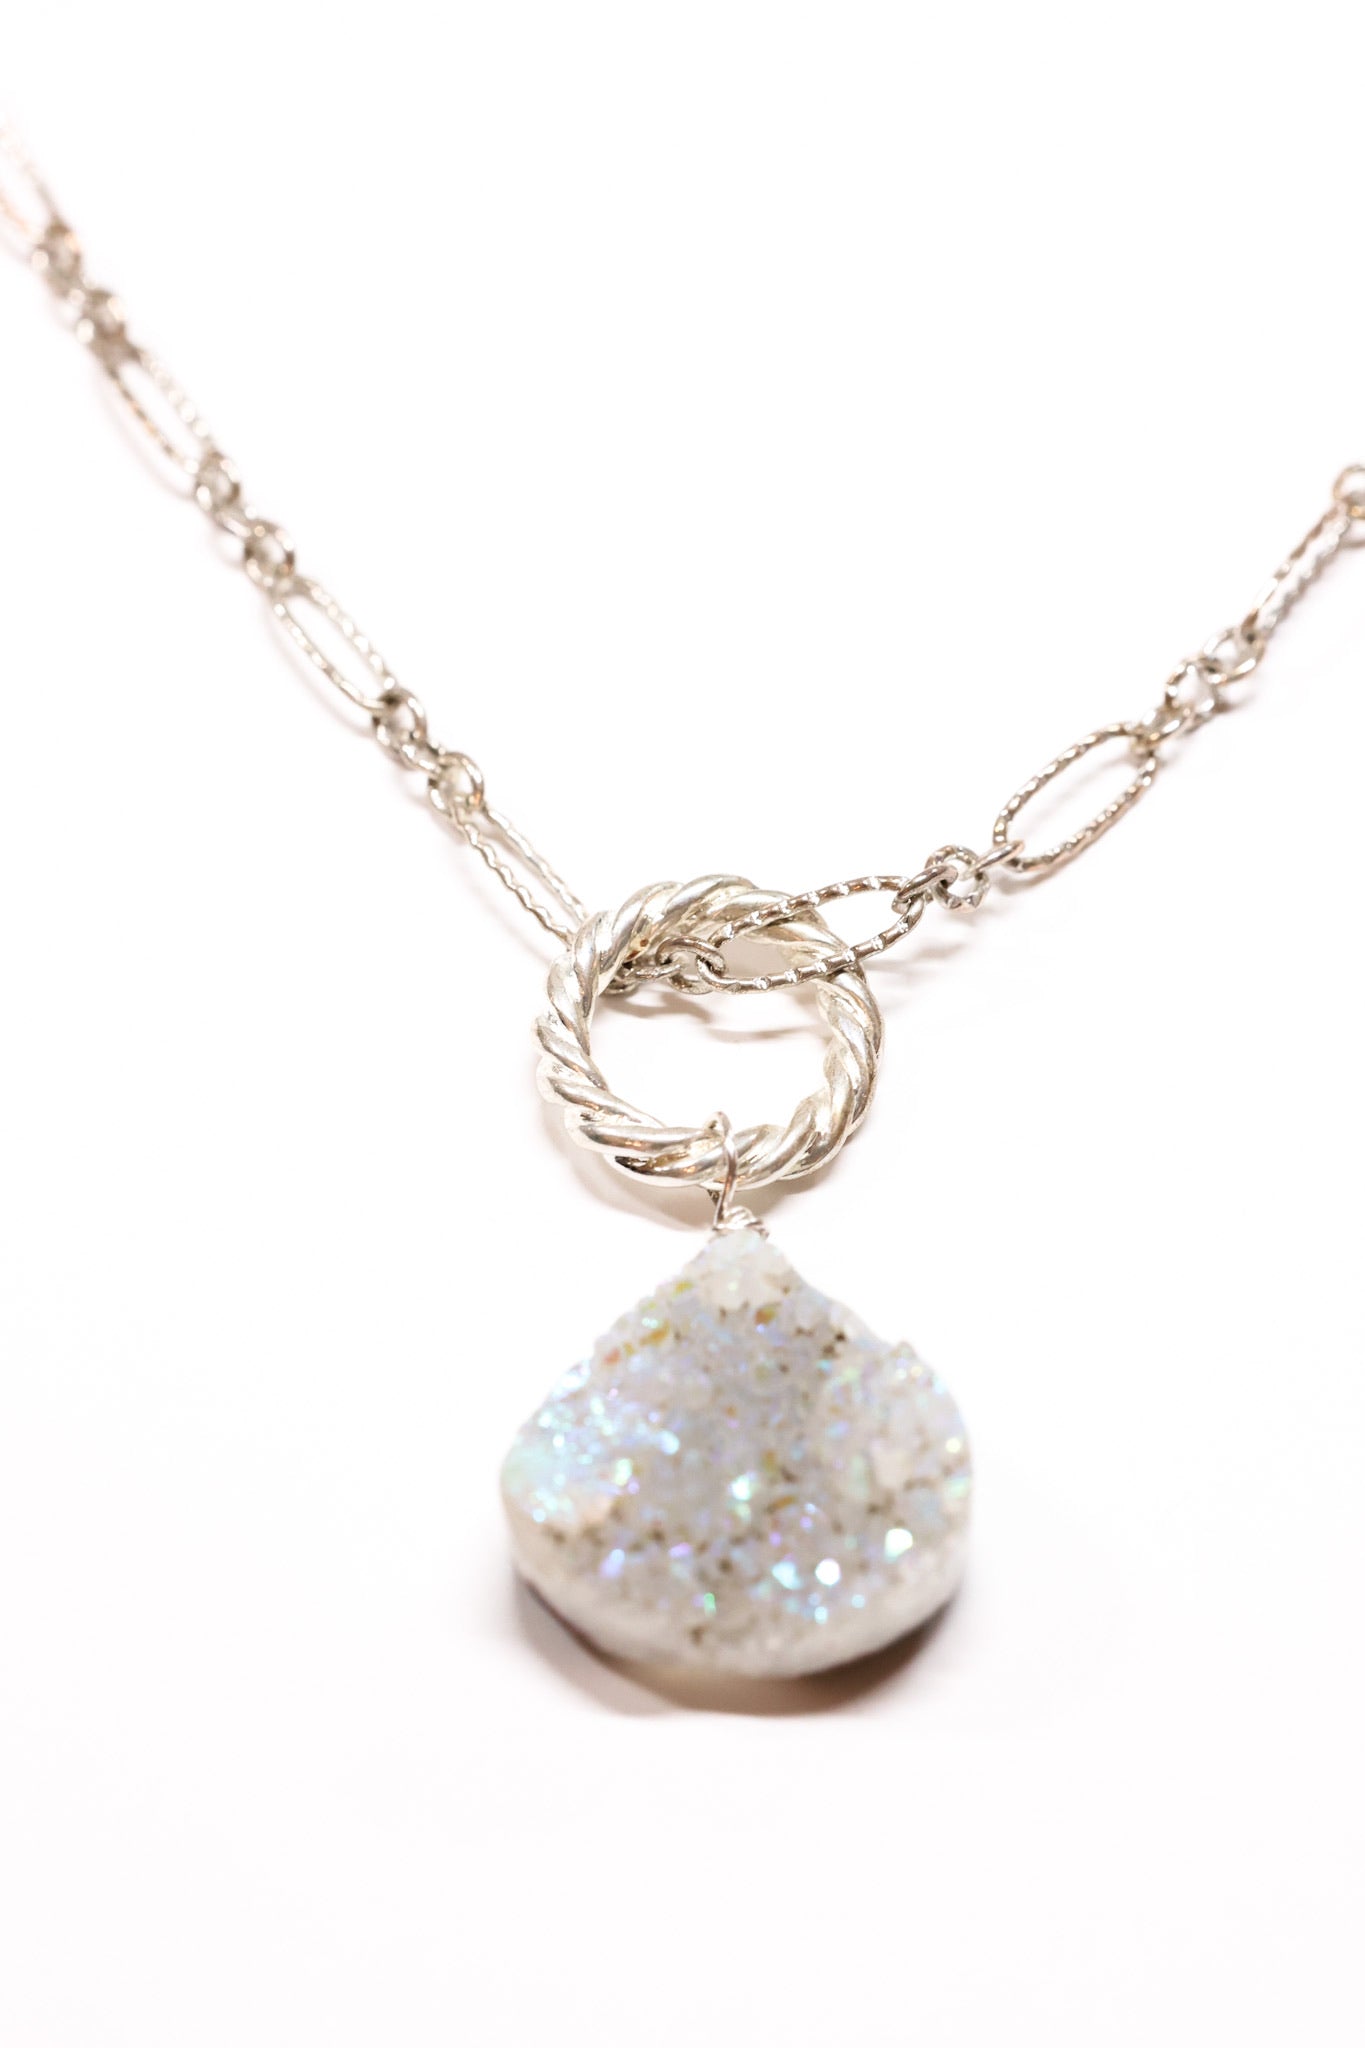 AB Drusy Necklace in silver